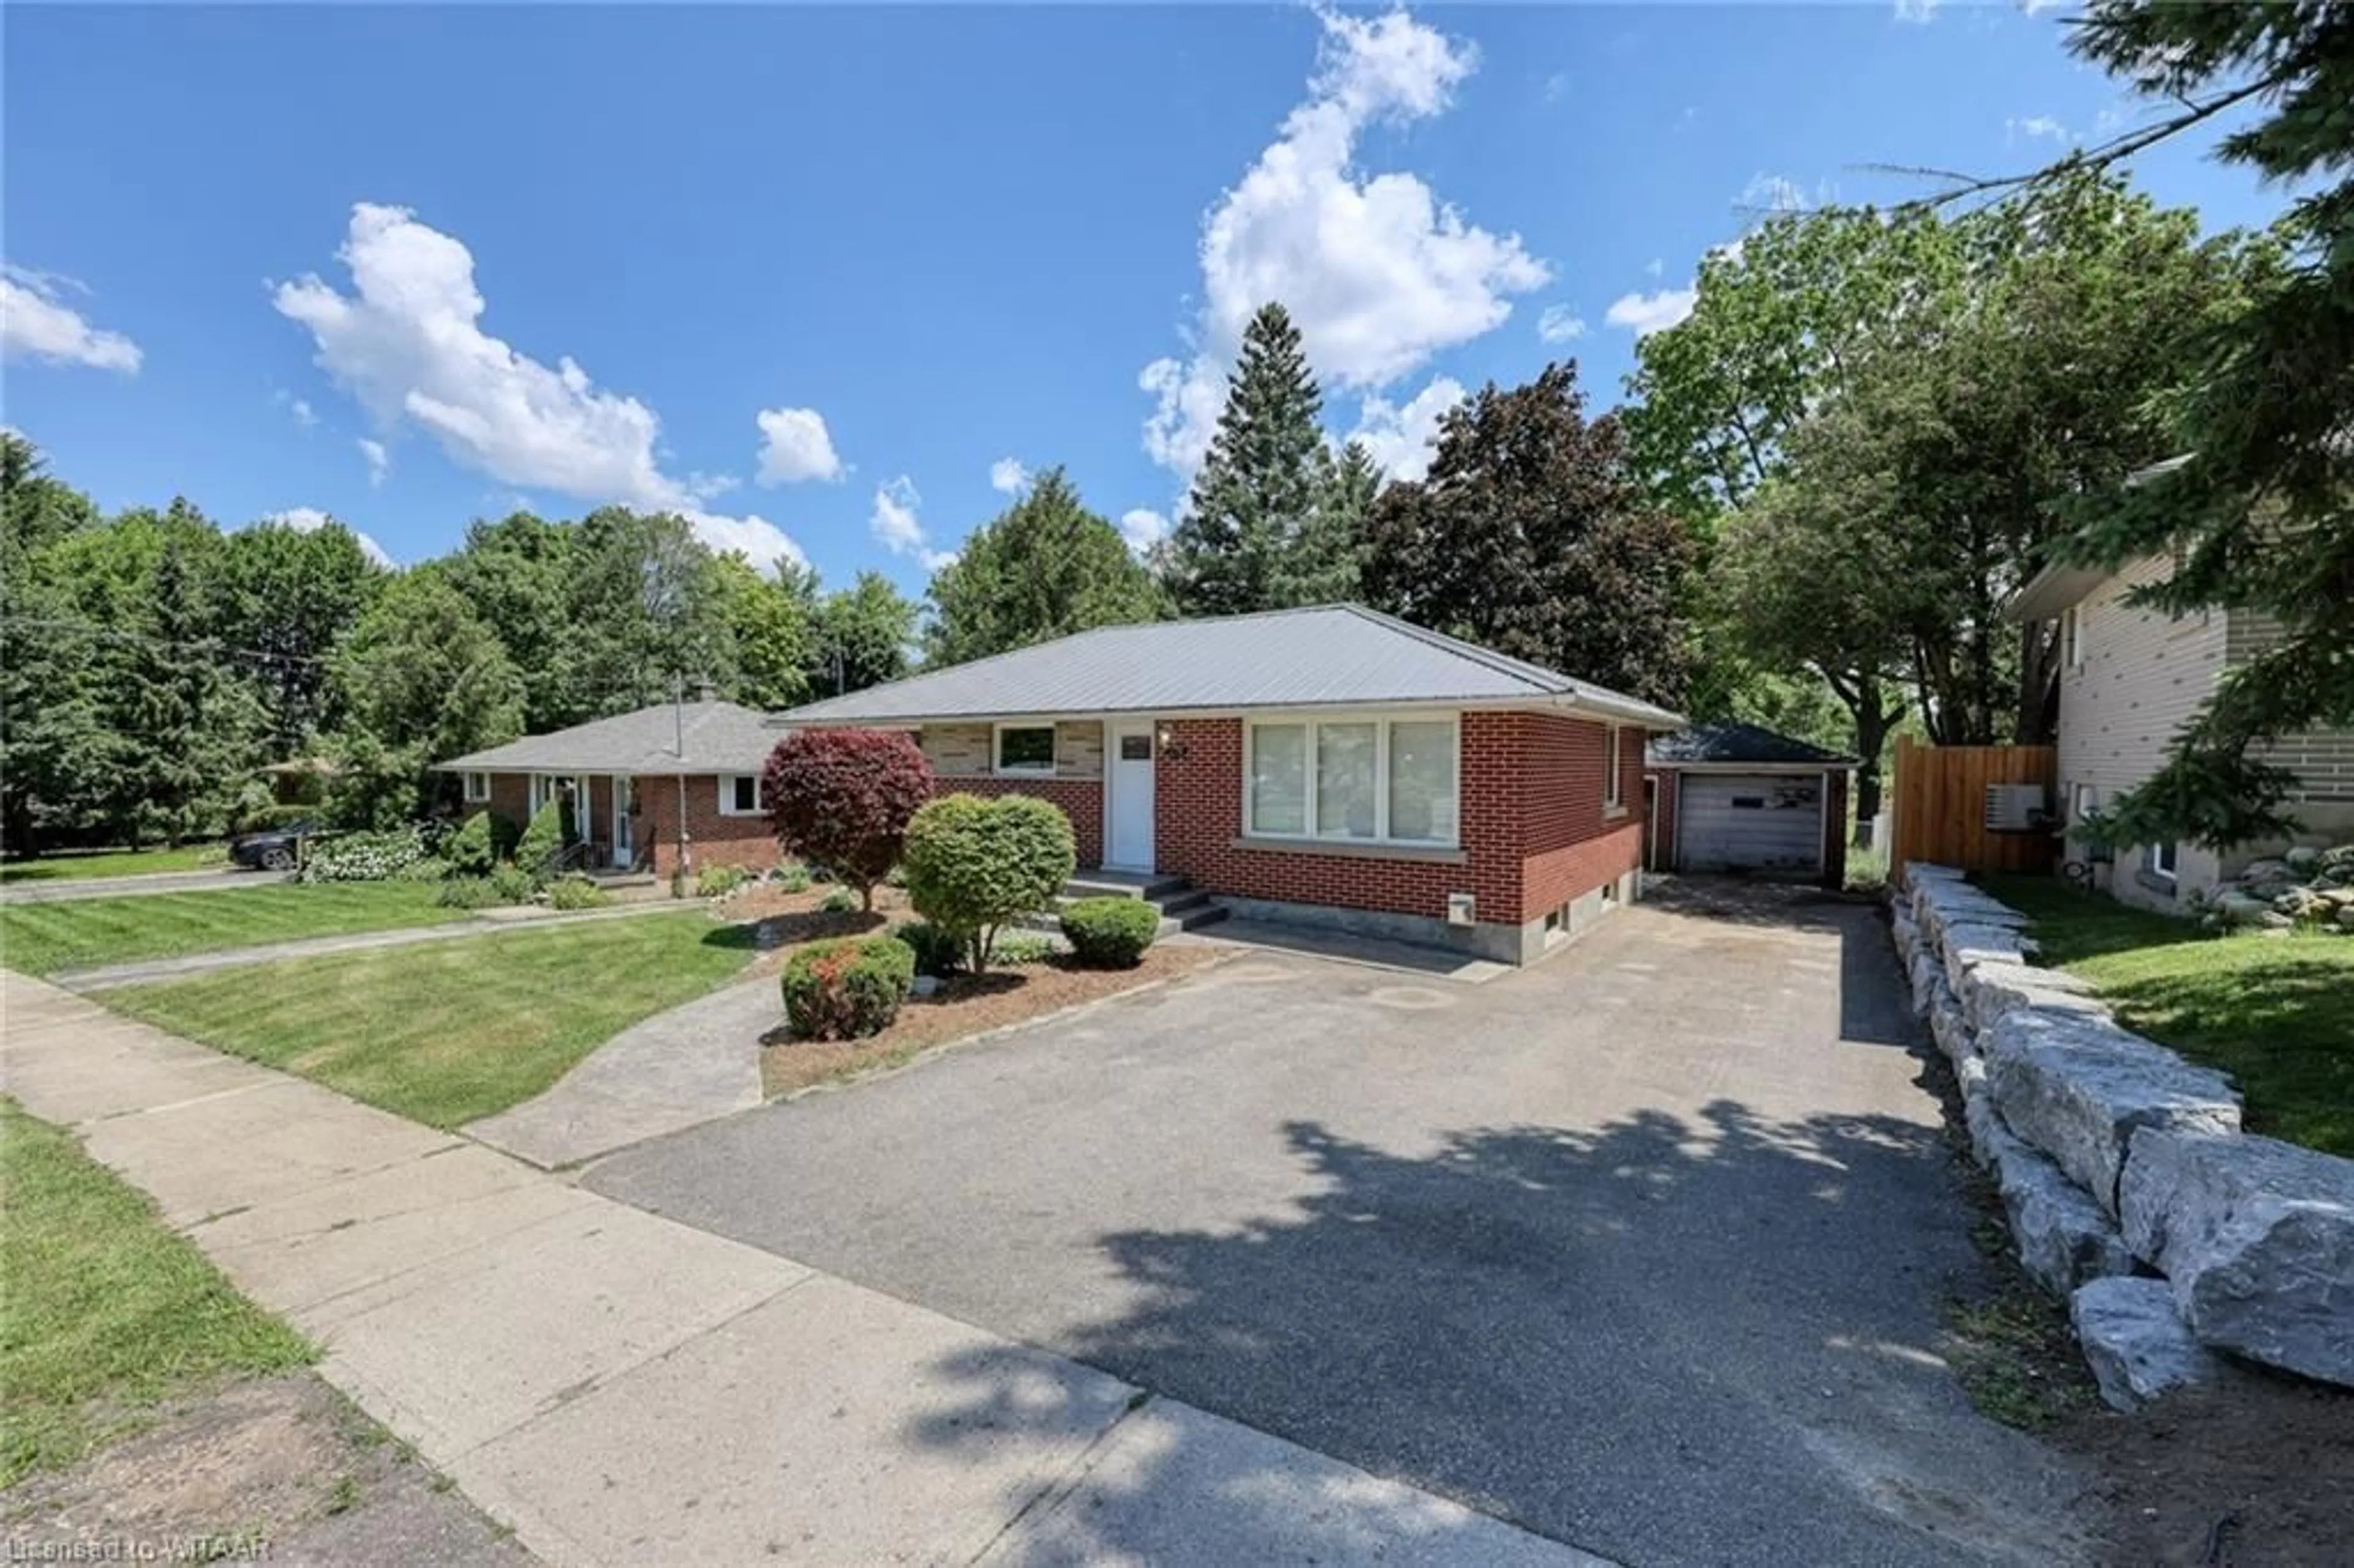 Frontside or backside of a home for 279 Robinson St, Woodstock Ontario N4S 3B8